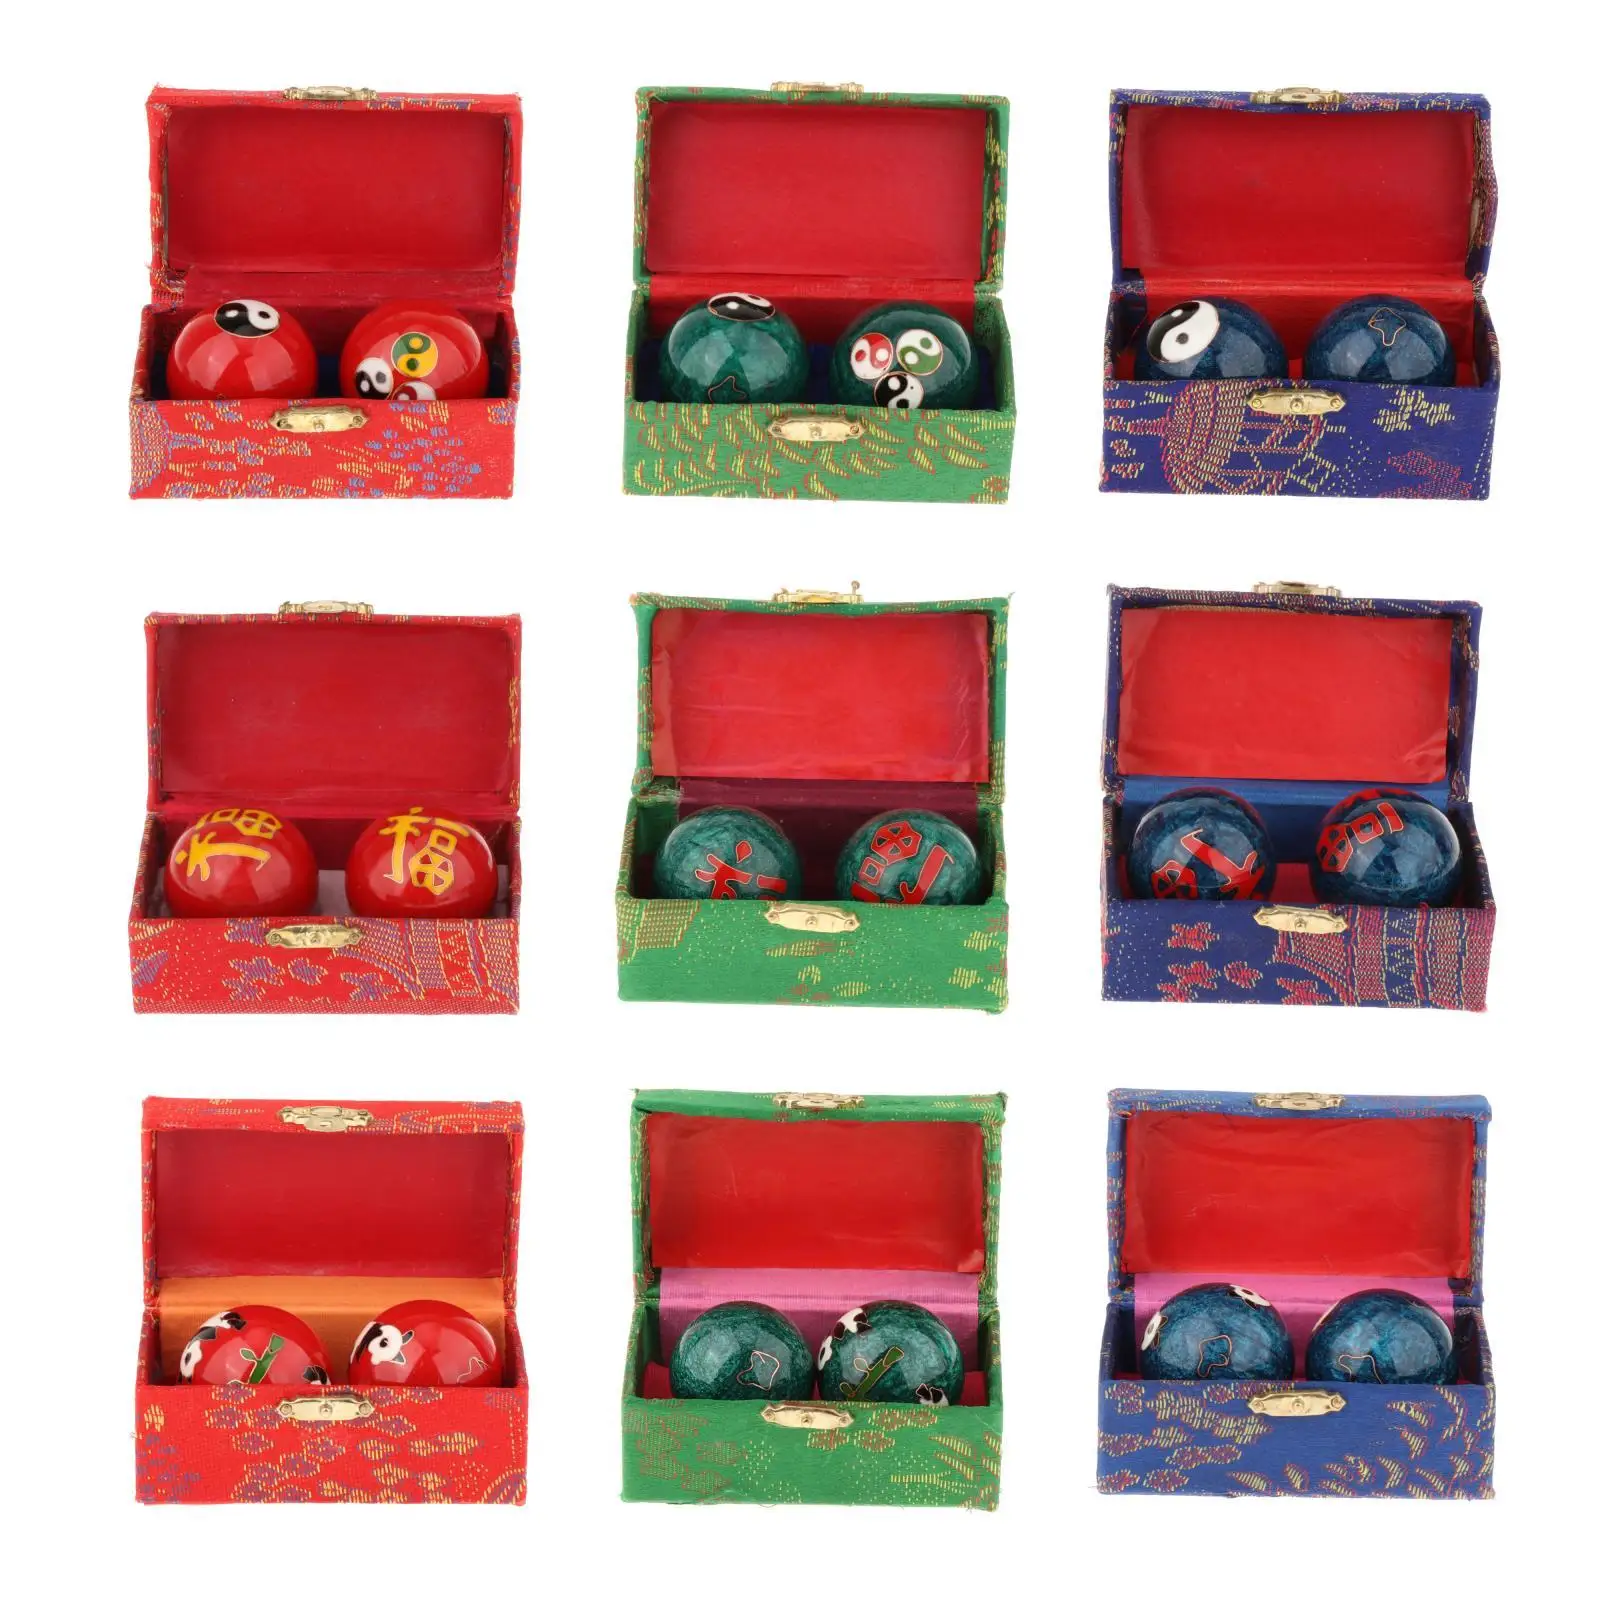 2 Pieces Massage Balls with Storage Box Exerciser Chinese Health Balls for